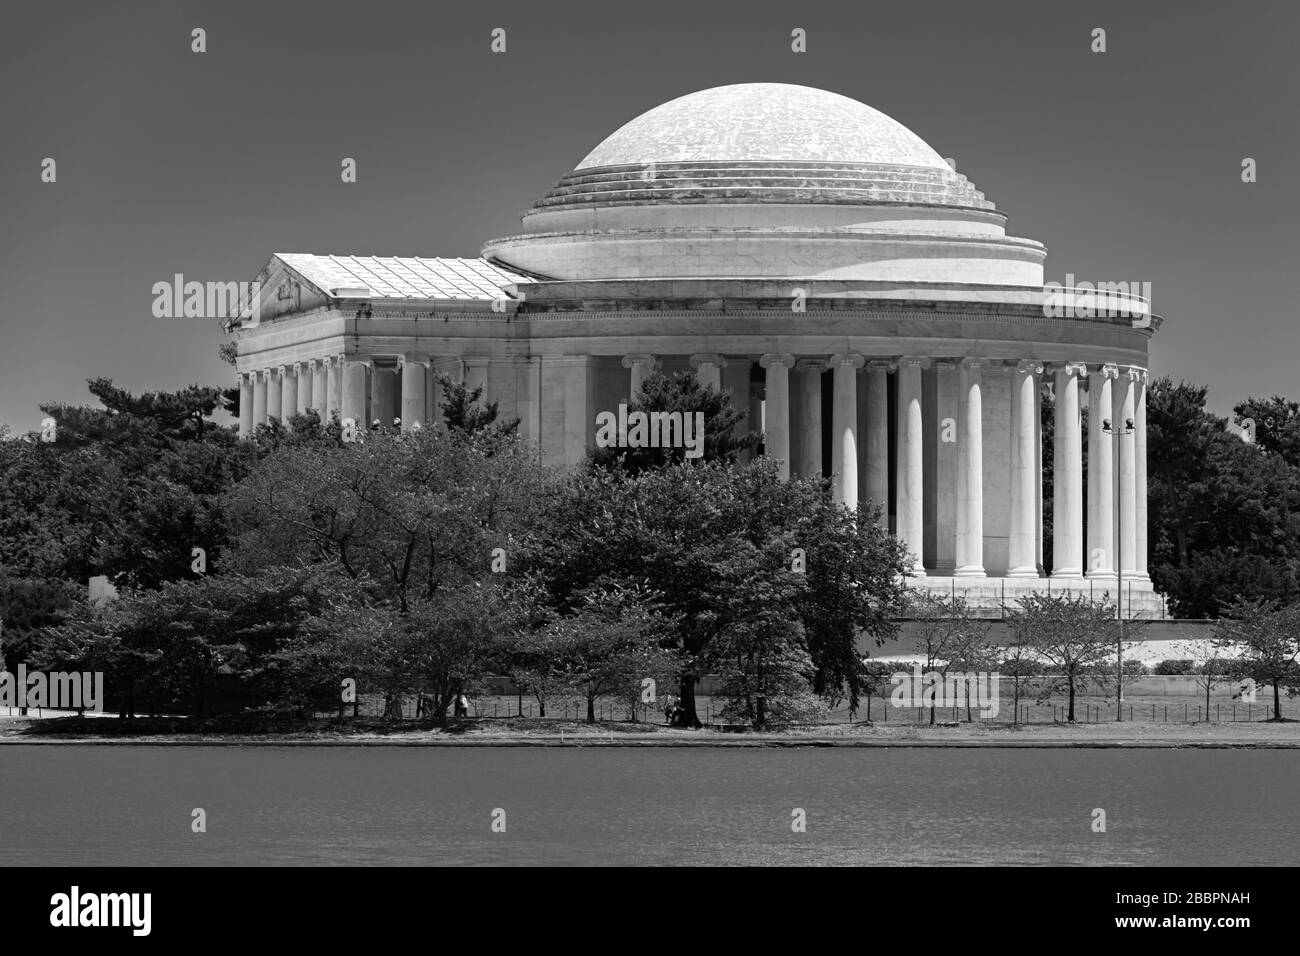 The white marble pantheon of the Jefferson Memorial on the banks of the Potomac Tidal Basin in Washington DC Stock Photo